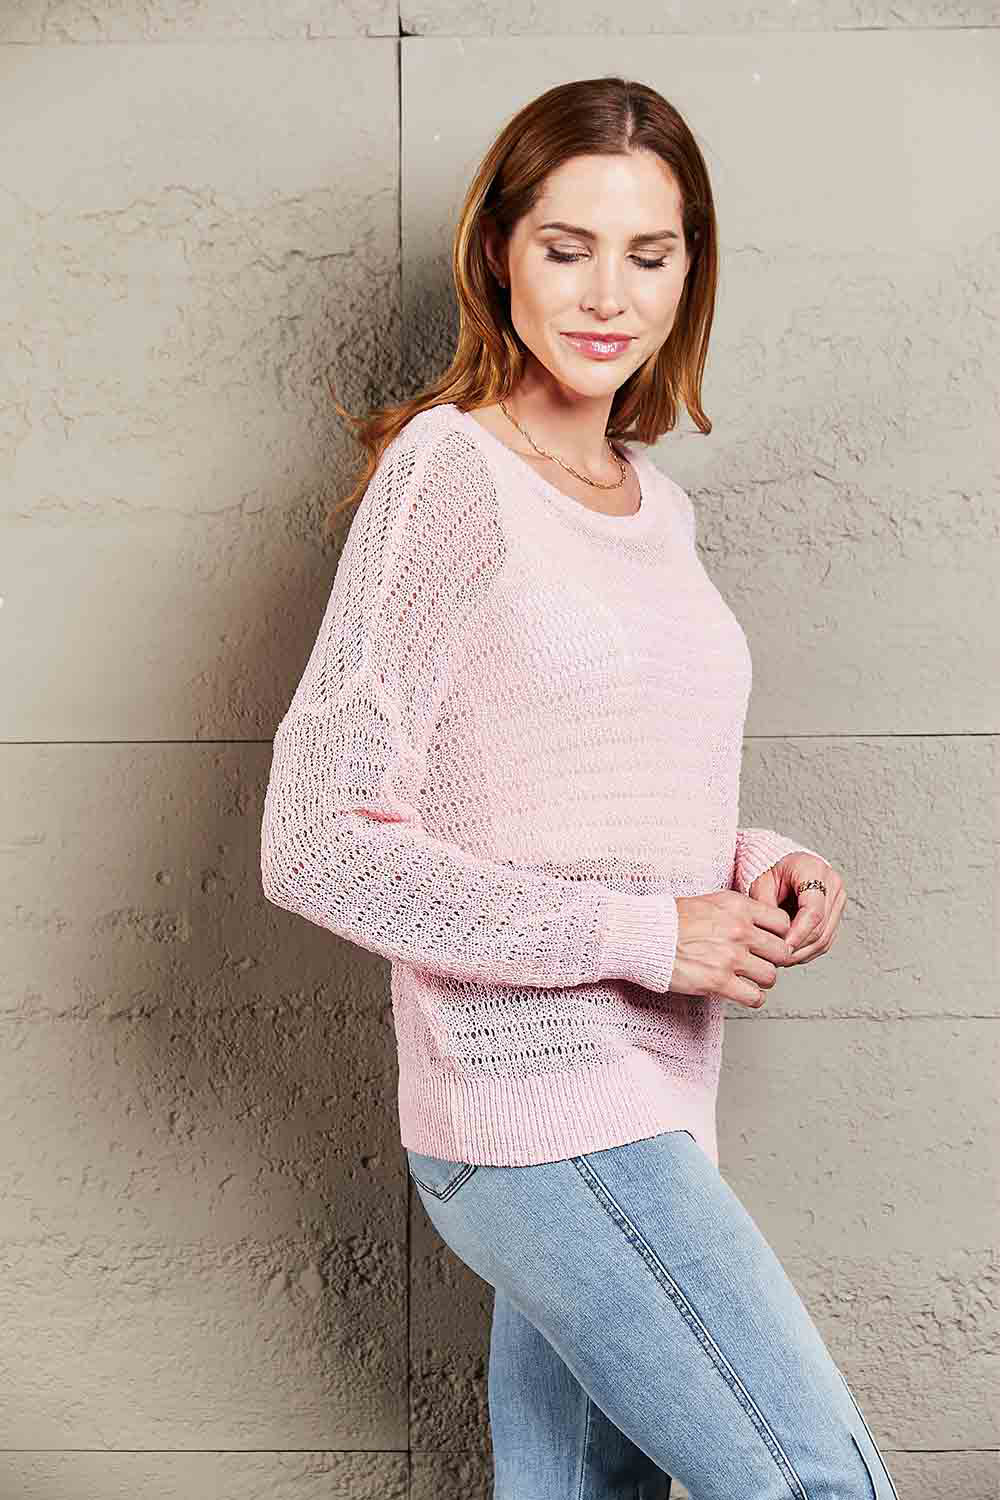 Double Take Openwork Round Neck Dropped Shoulder Knit Top